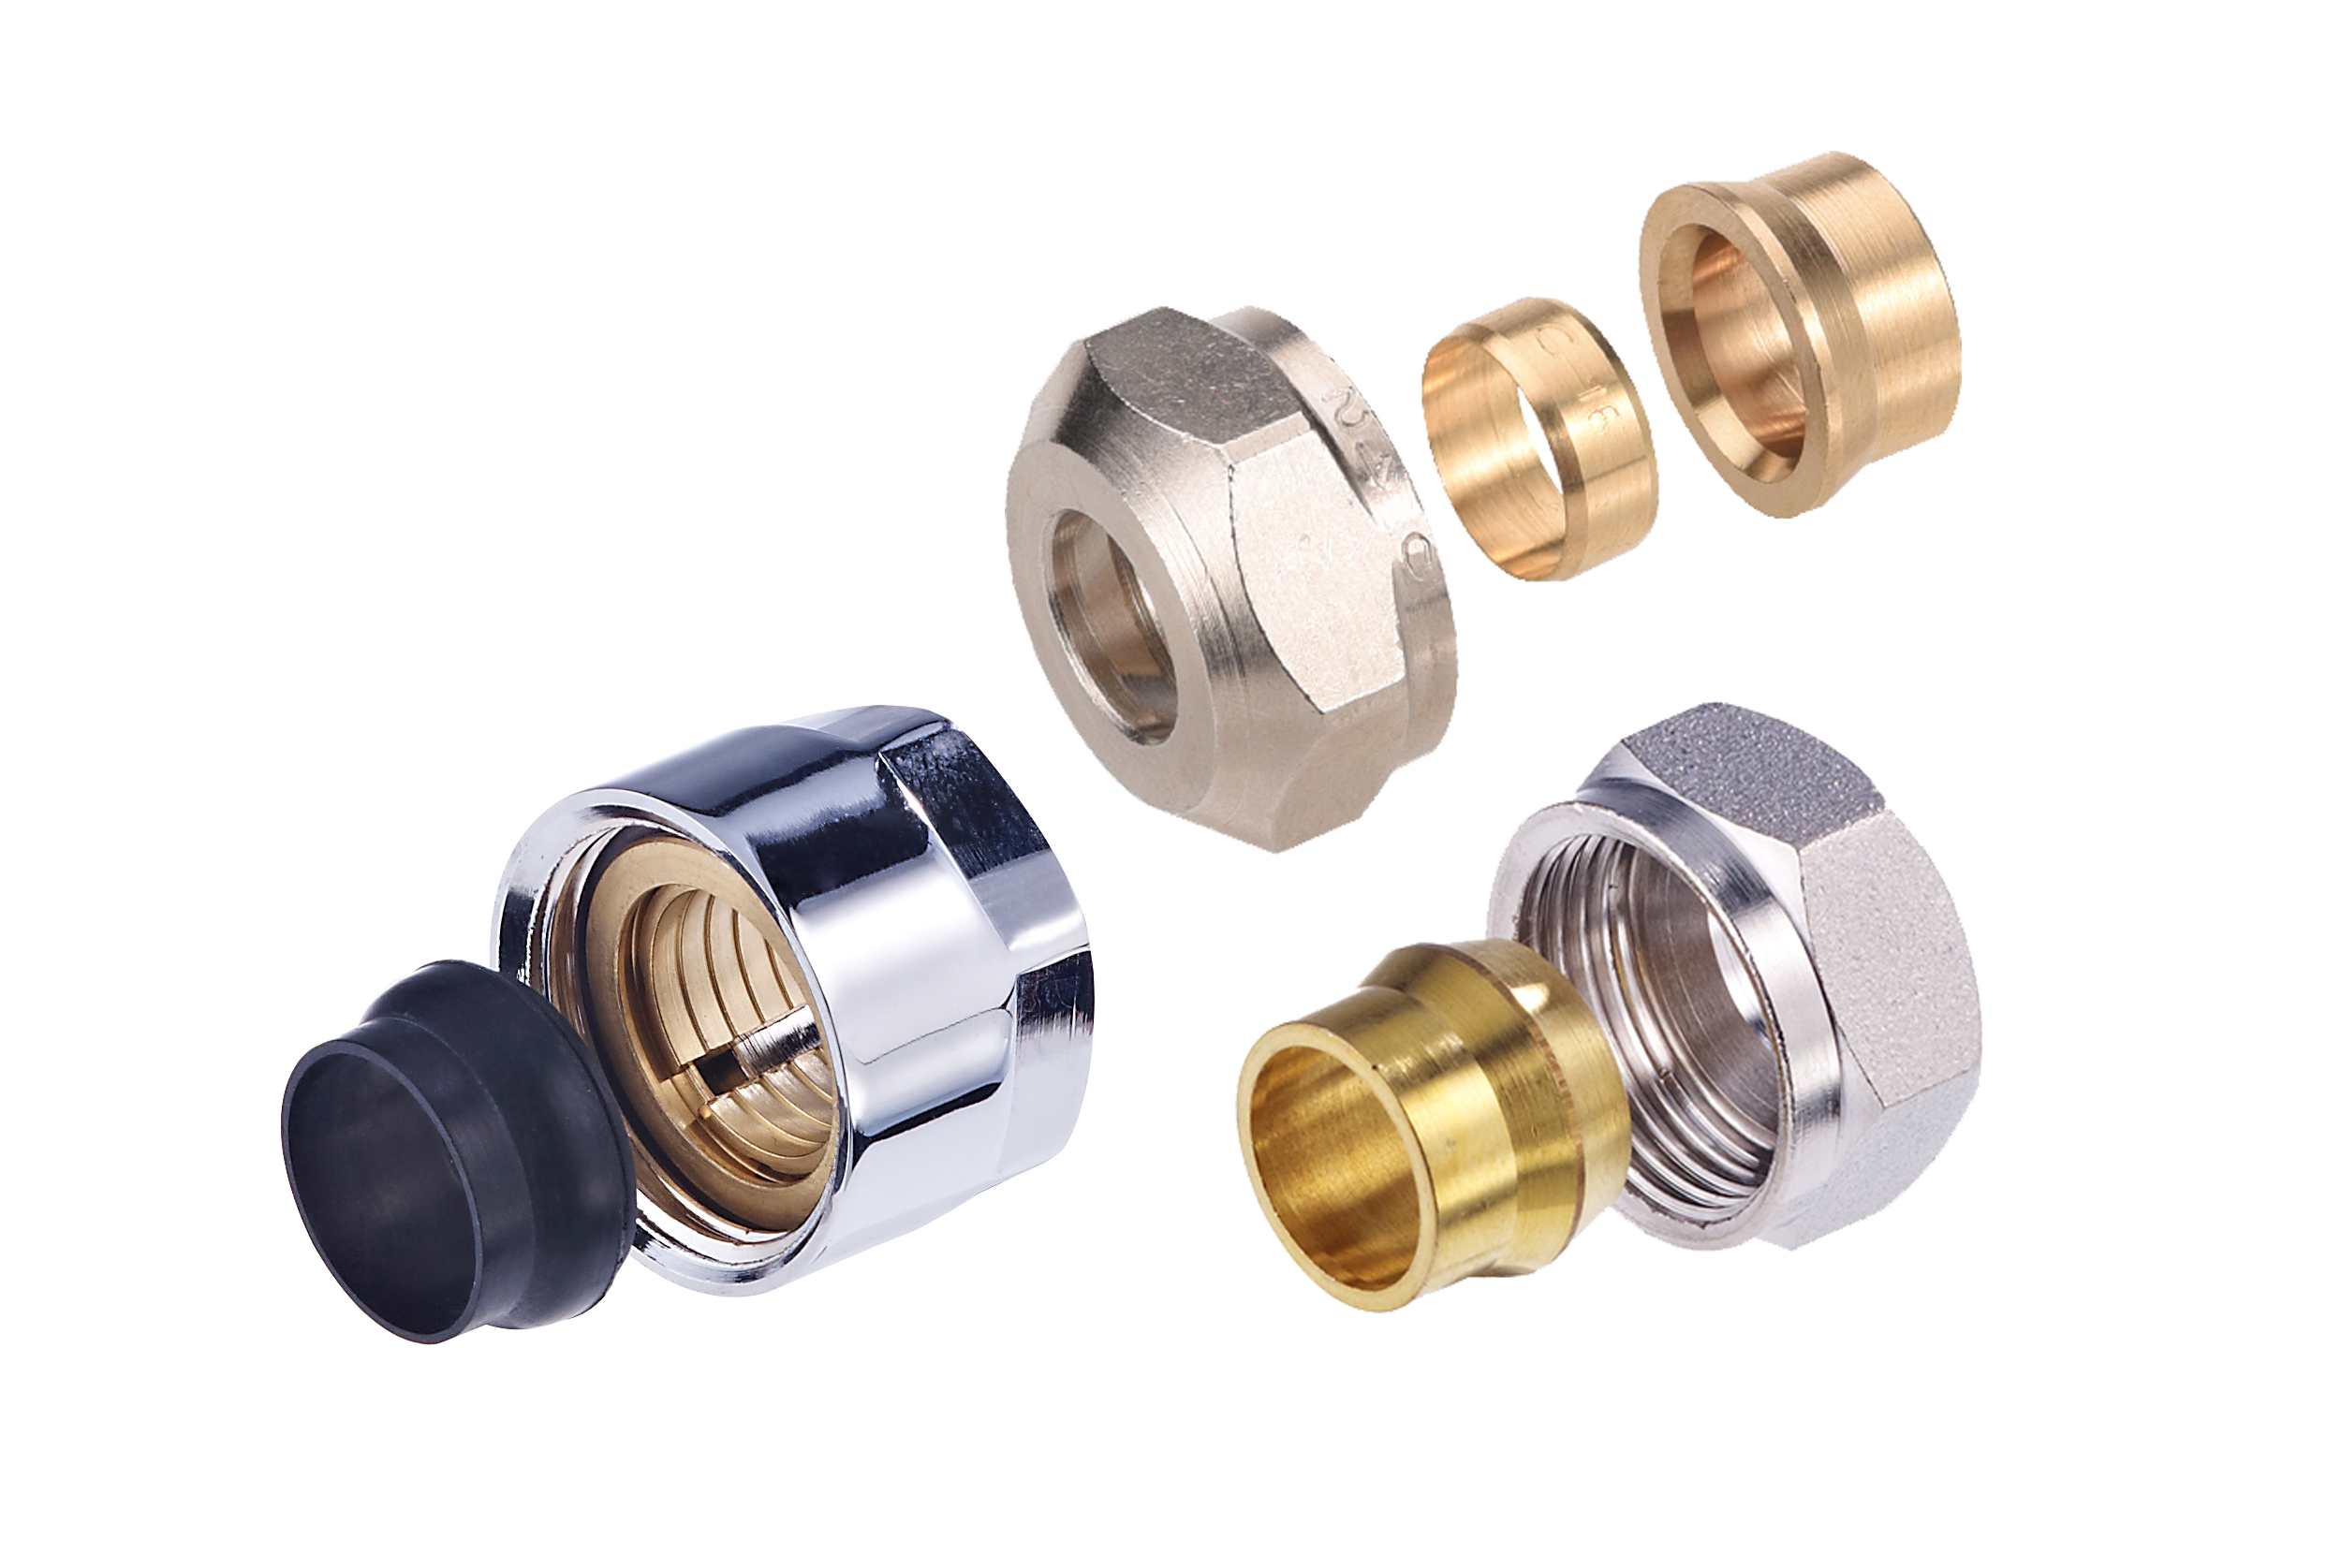 Compression fittings for valves